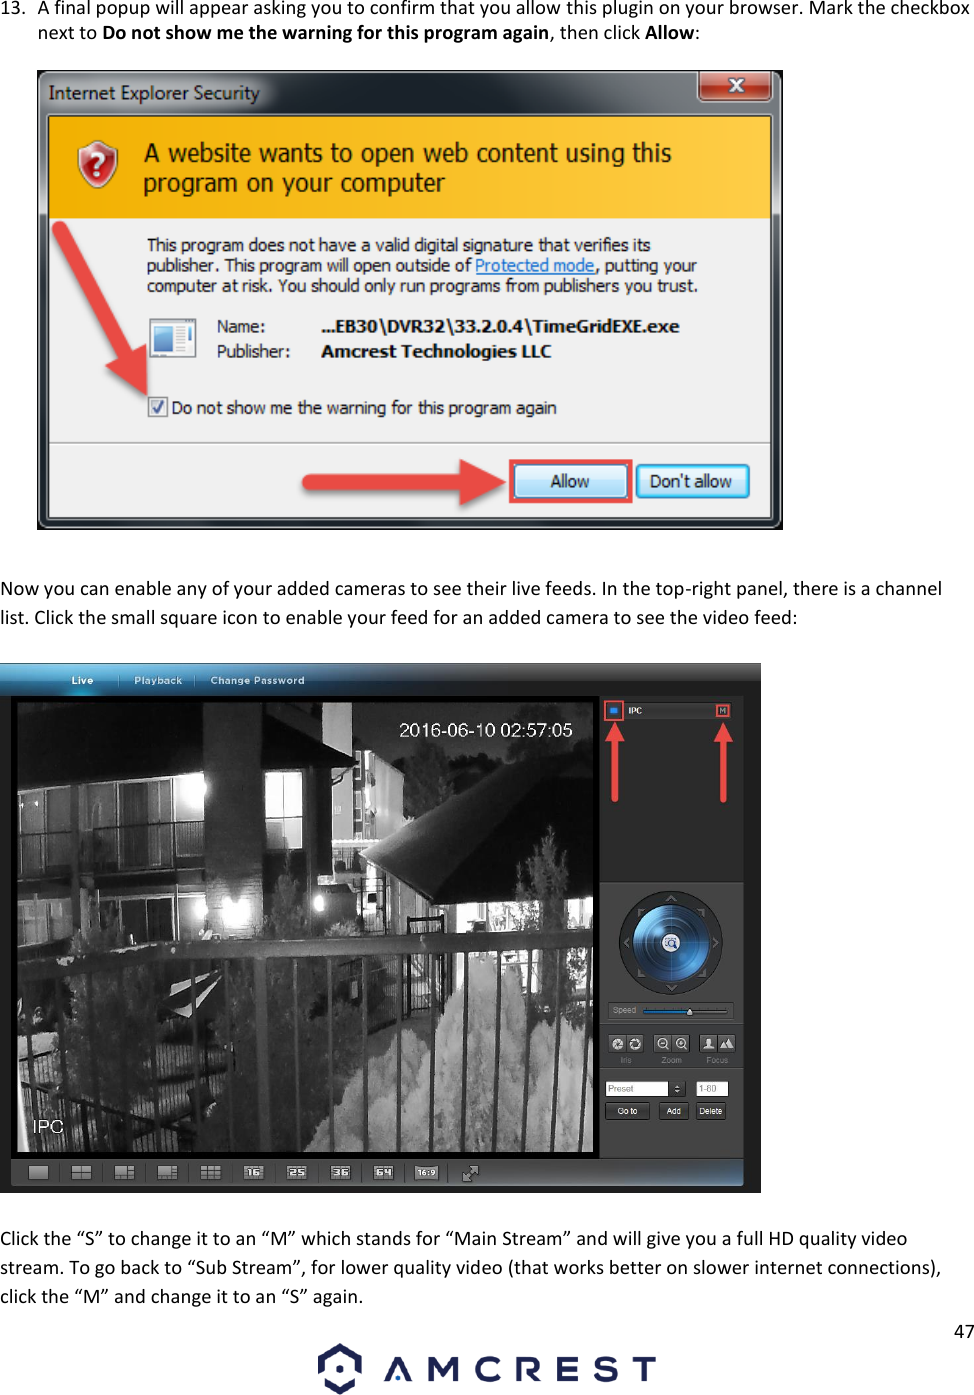 47   13. A final popup will appear asking you to confirm that you allow this plugin on your browser. Mark the checkbox next to Do not show me the warning for this program again, then click Allow:     Now you can enable any of your added cameras to see their live feeds. In the top-right panel, there is a channel list. Click the small square icon to enable your feed for an added camera to see the video feed:    Click the “S” to change it to an “M” which stands for “Main Stream” and will give you a full HD quality video stream. To go back to “Sub Stream”, for lower quality video (that works better on slower internet connections), click the “M” and change it to an “S” again.   